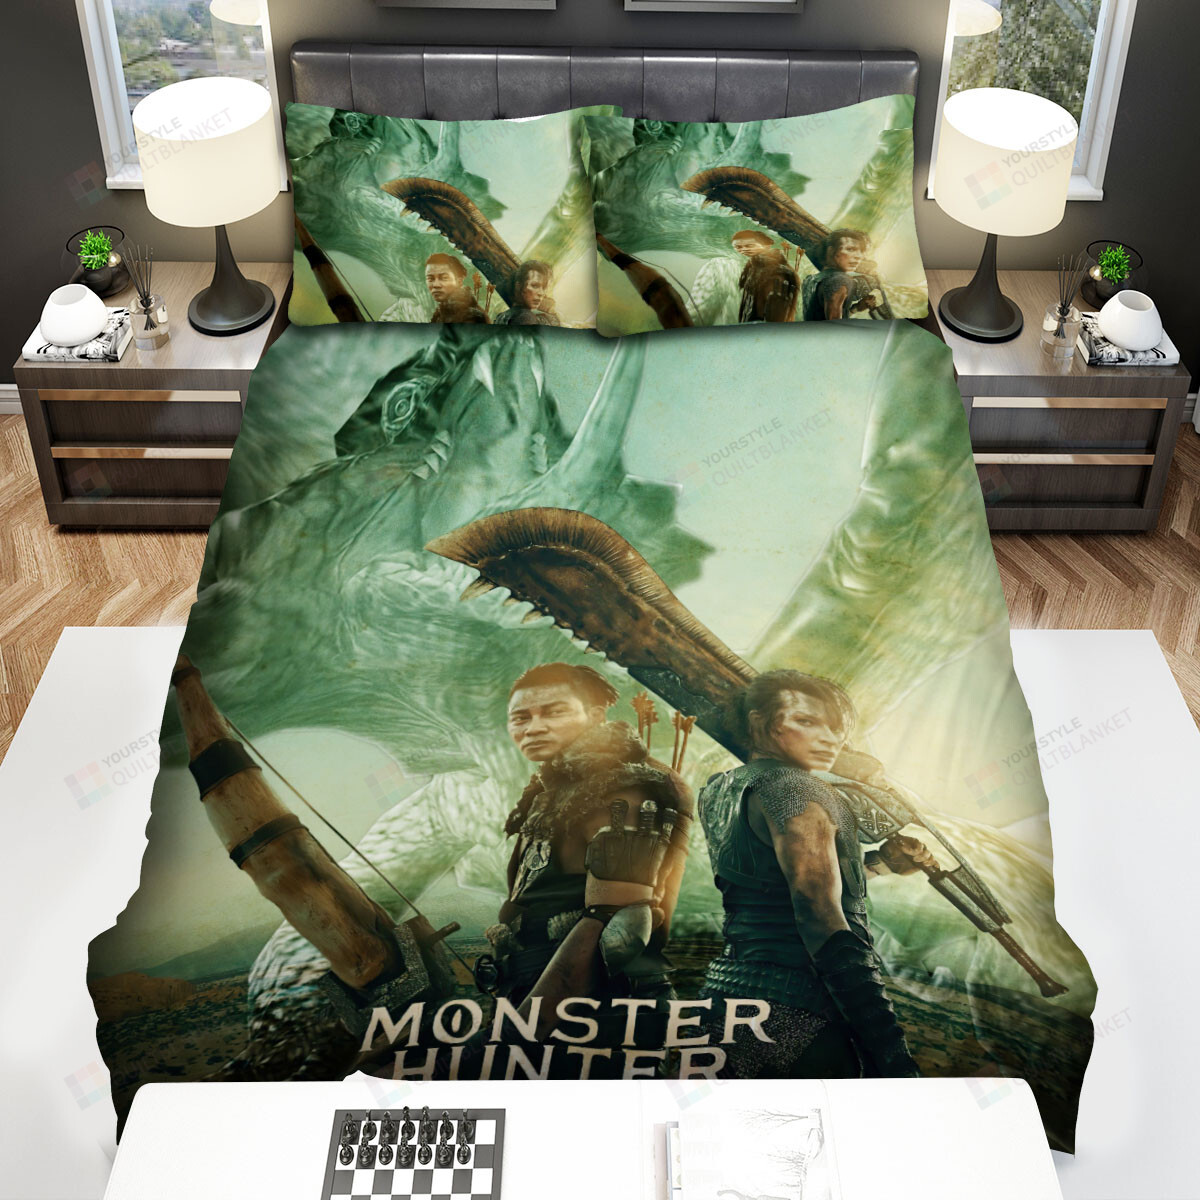 Monster Hunter (I) Two Main Actors With Weapon And Monsters Movie Poster Bed Sheets Spread Comforter Duvet Cover Bedding Sets